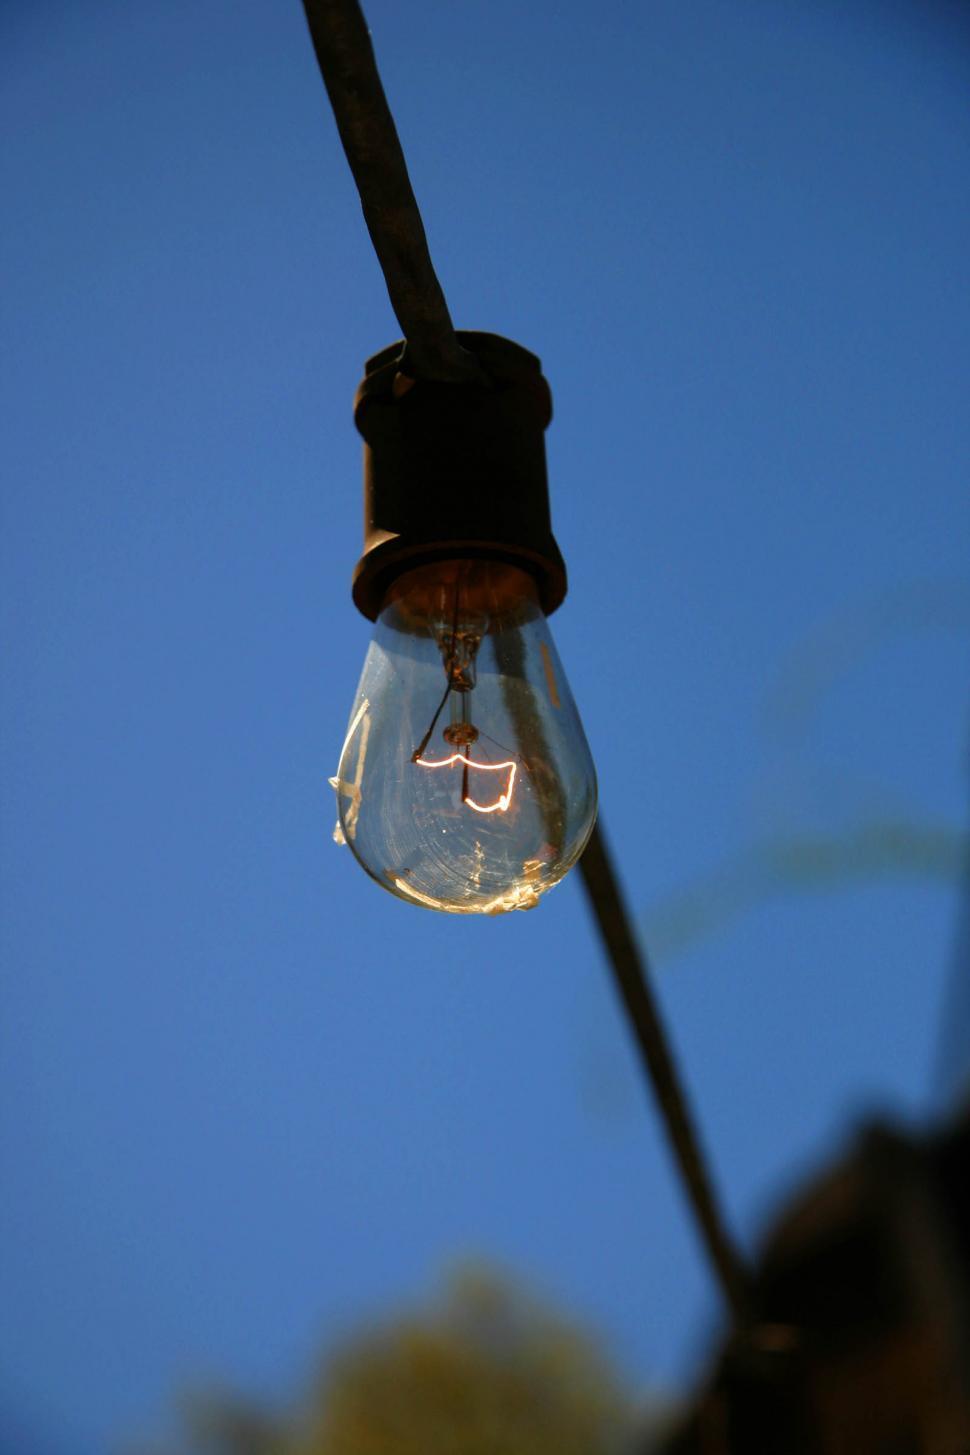 Free Image of Hanging Light Bulb With Blue Sky Background 